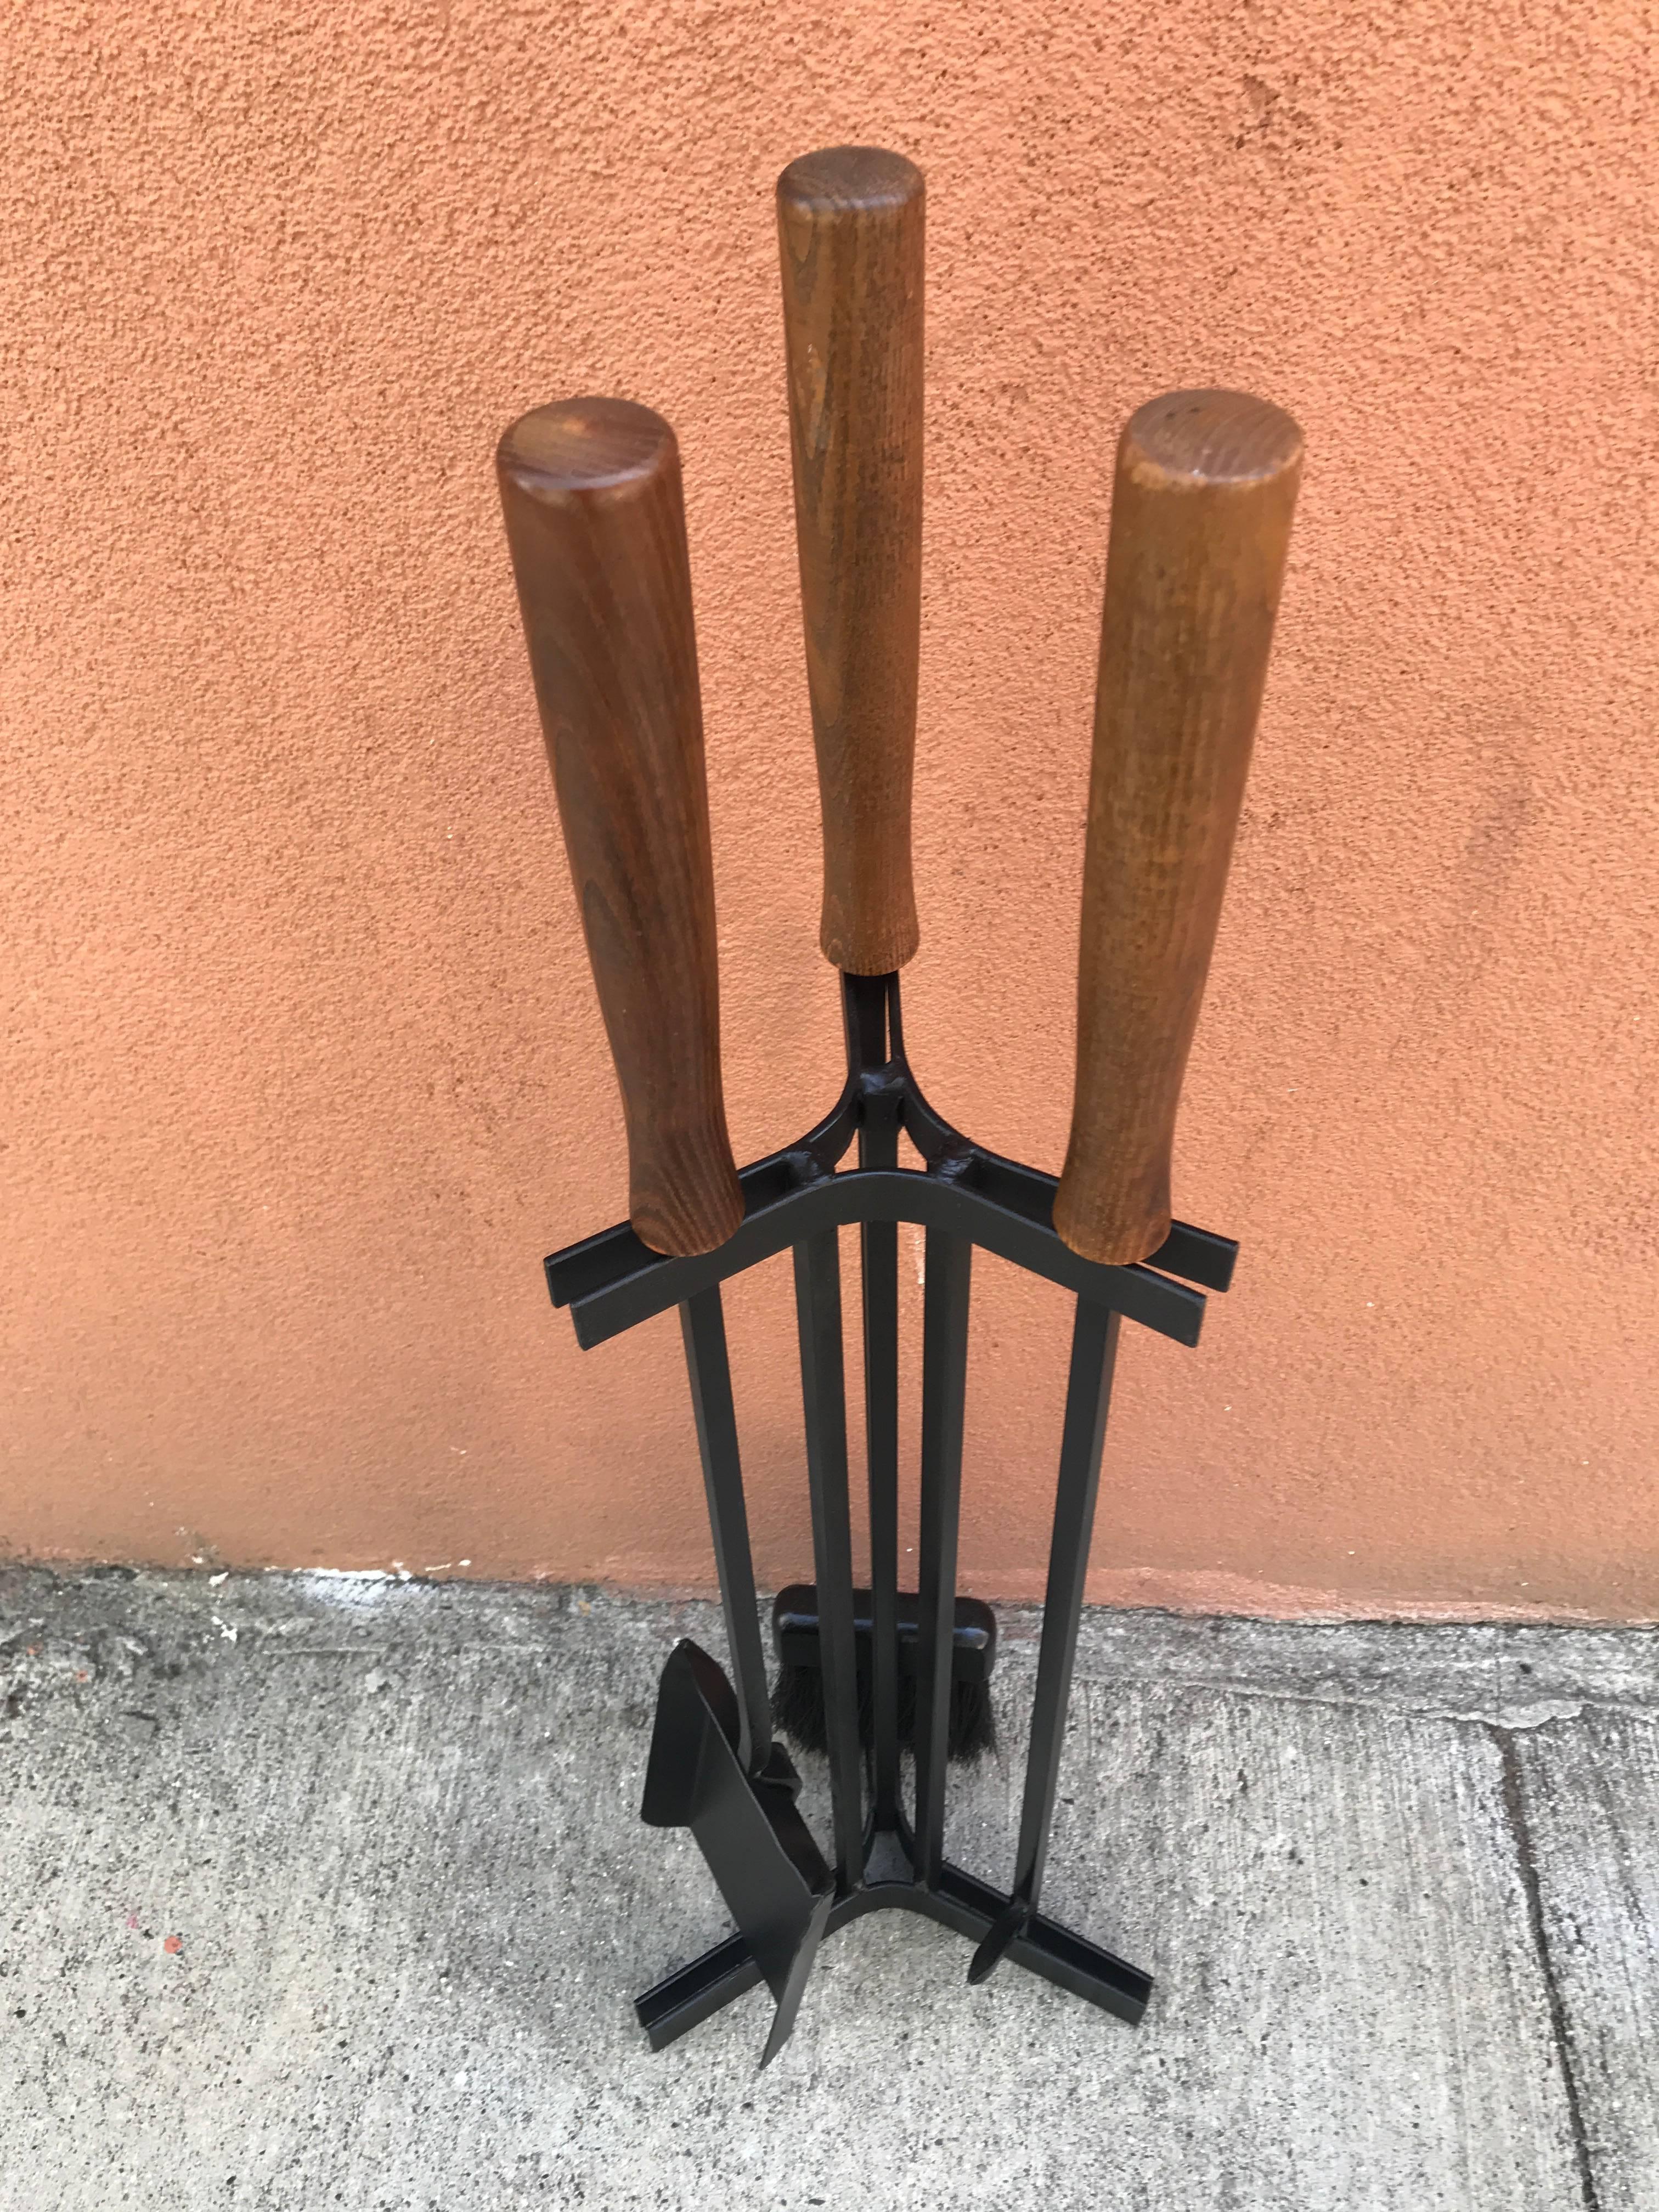 Mid-20th Century American Modern Iron and Wood Fireplace Tools For Sale